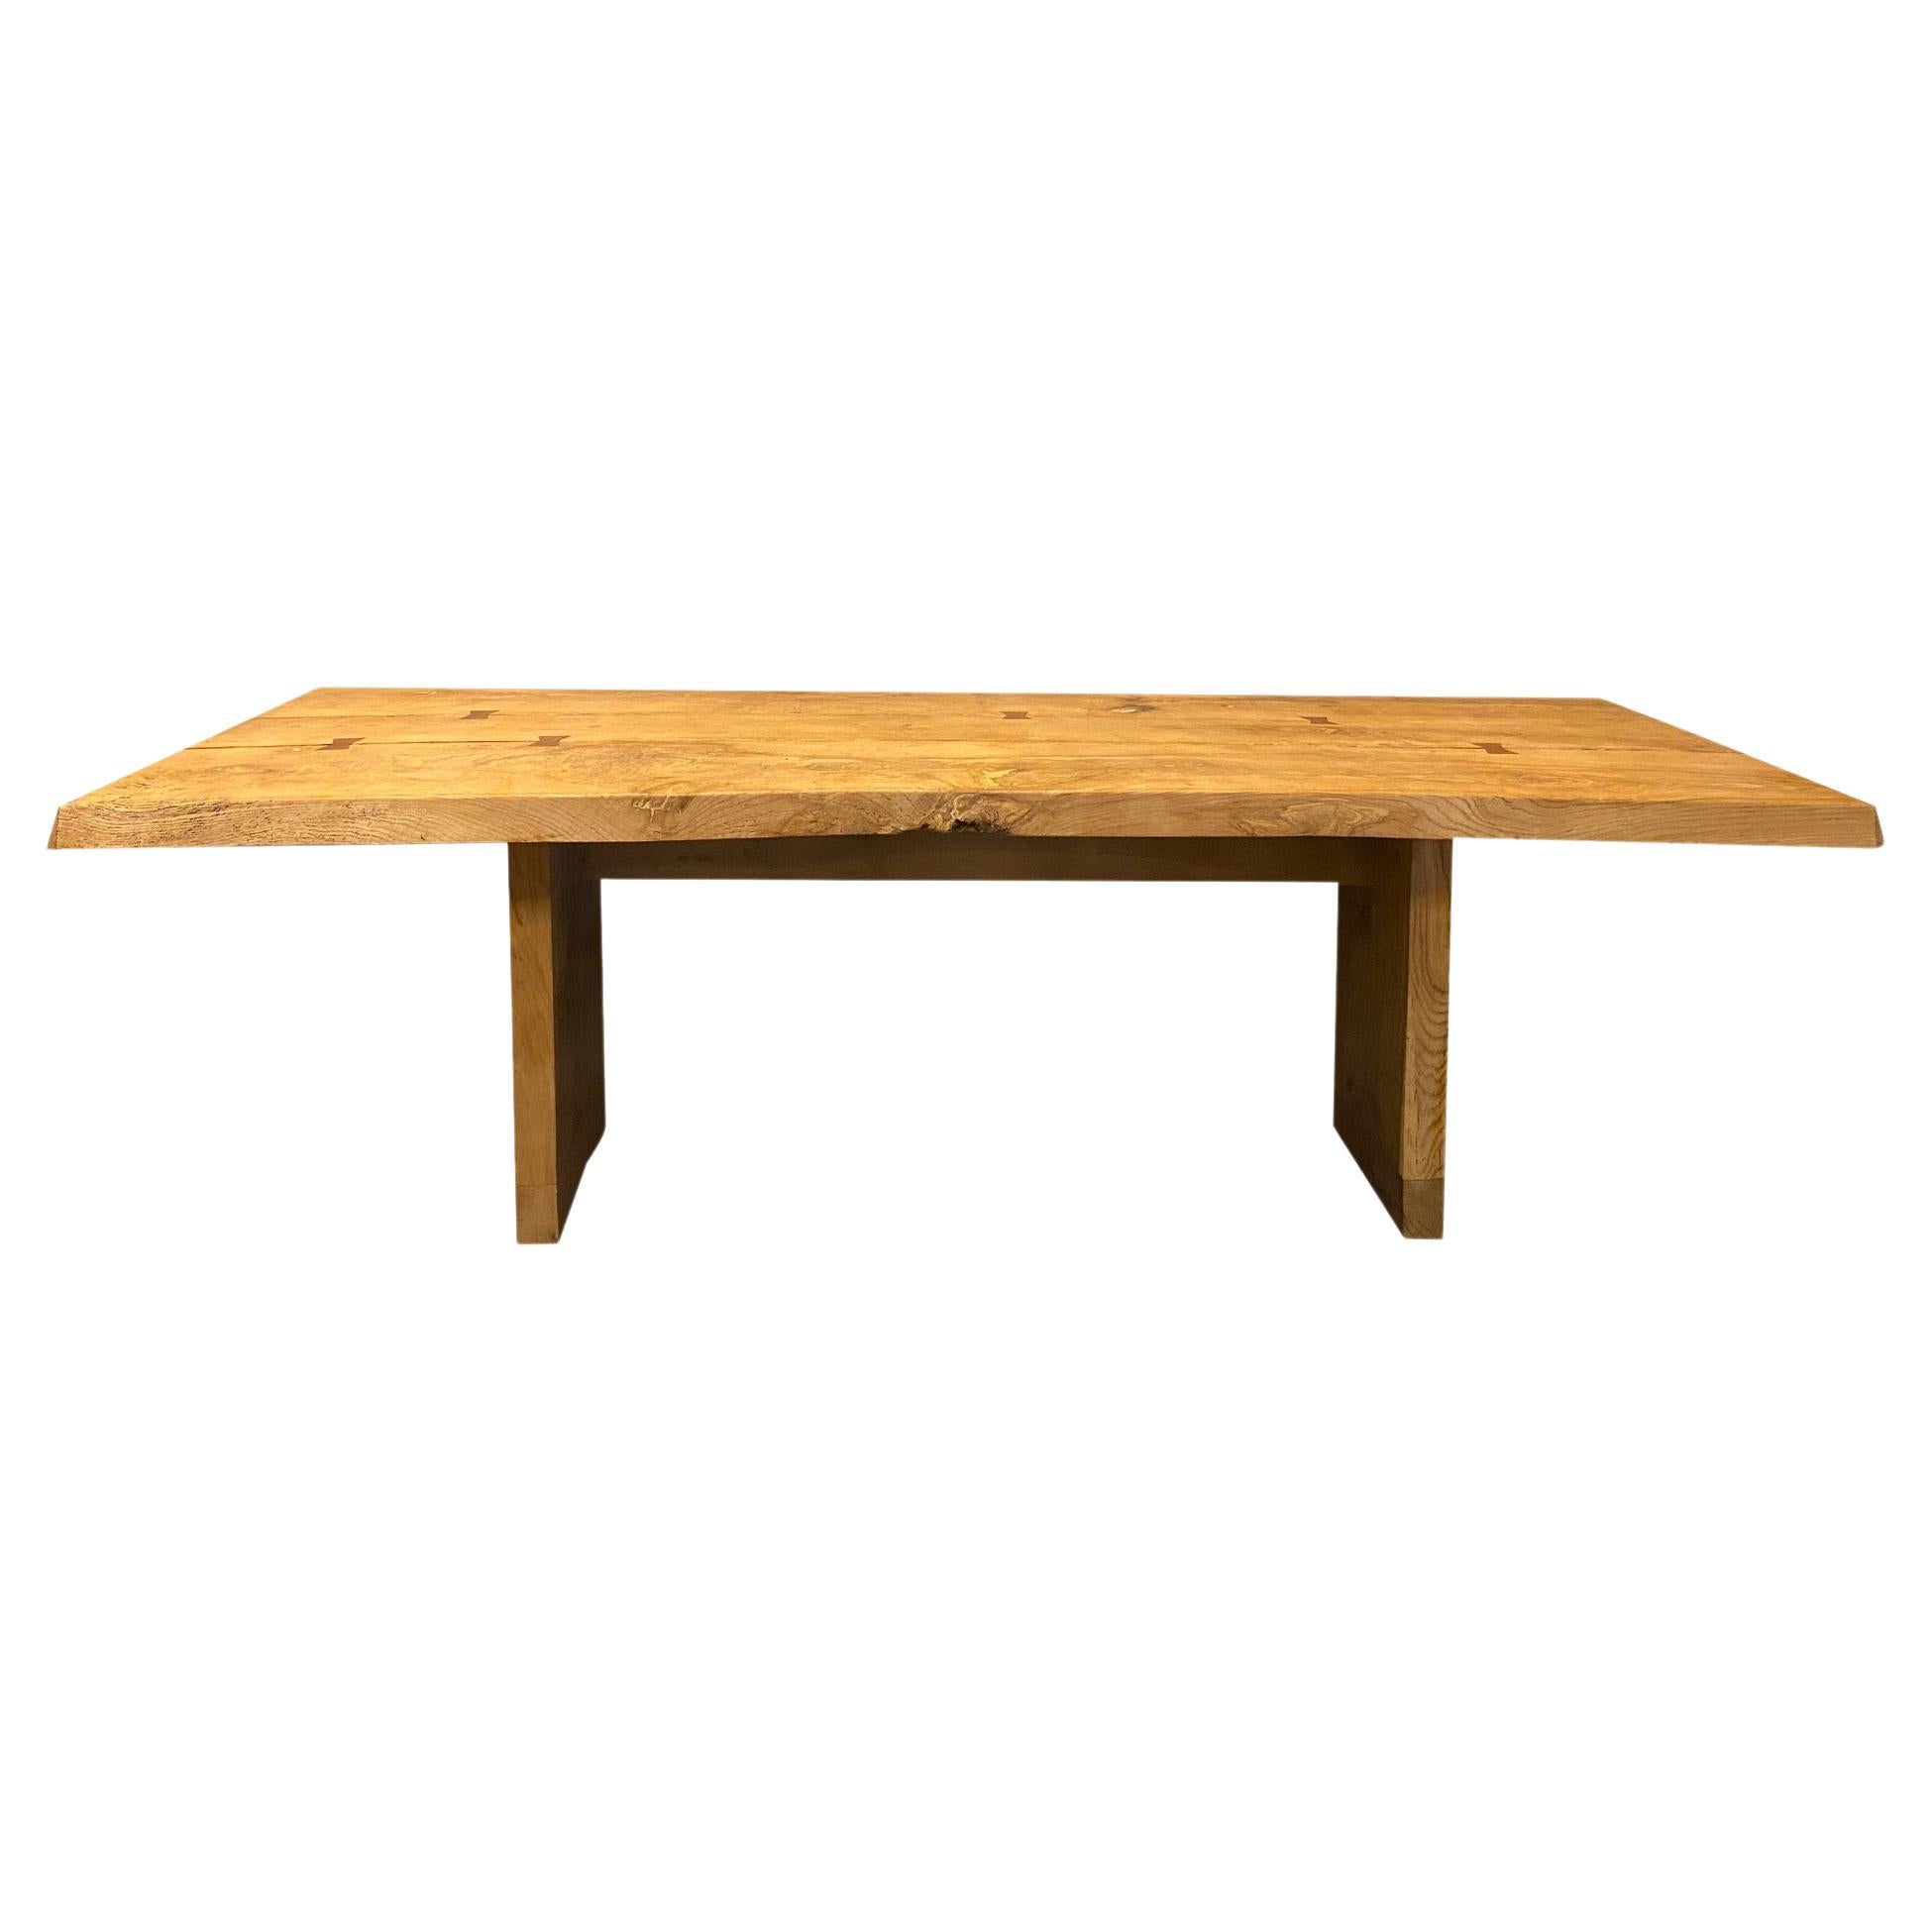 Ash Plank Top Craftsman Trestle Dining Table, France, 1970's